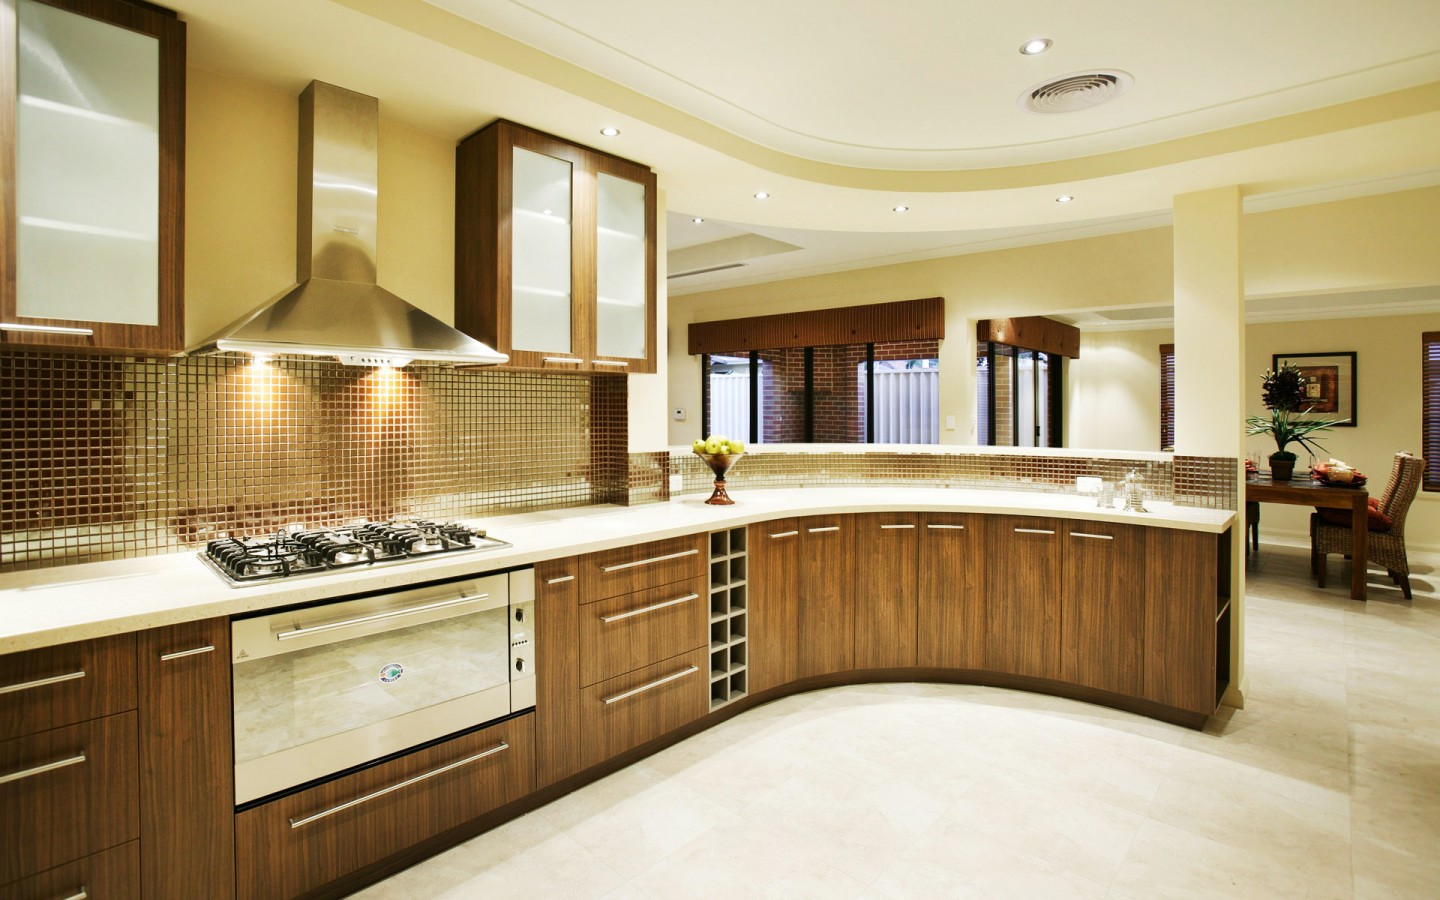 Home Ideas for Modular Kitchens Modern Homes